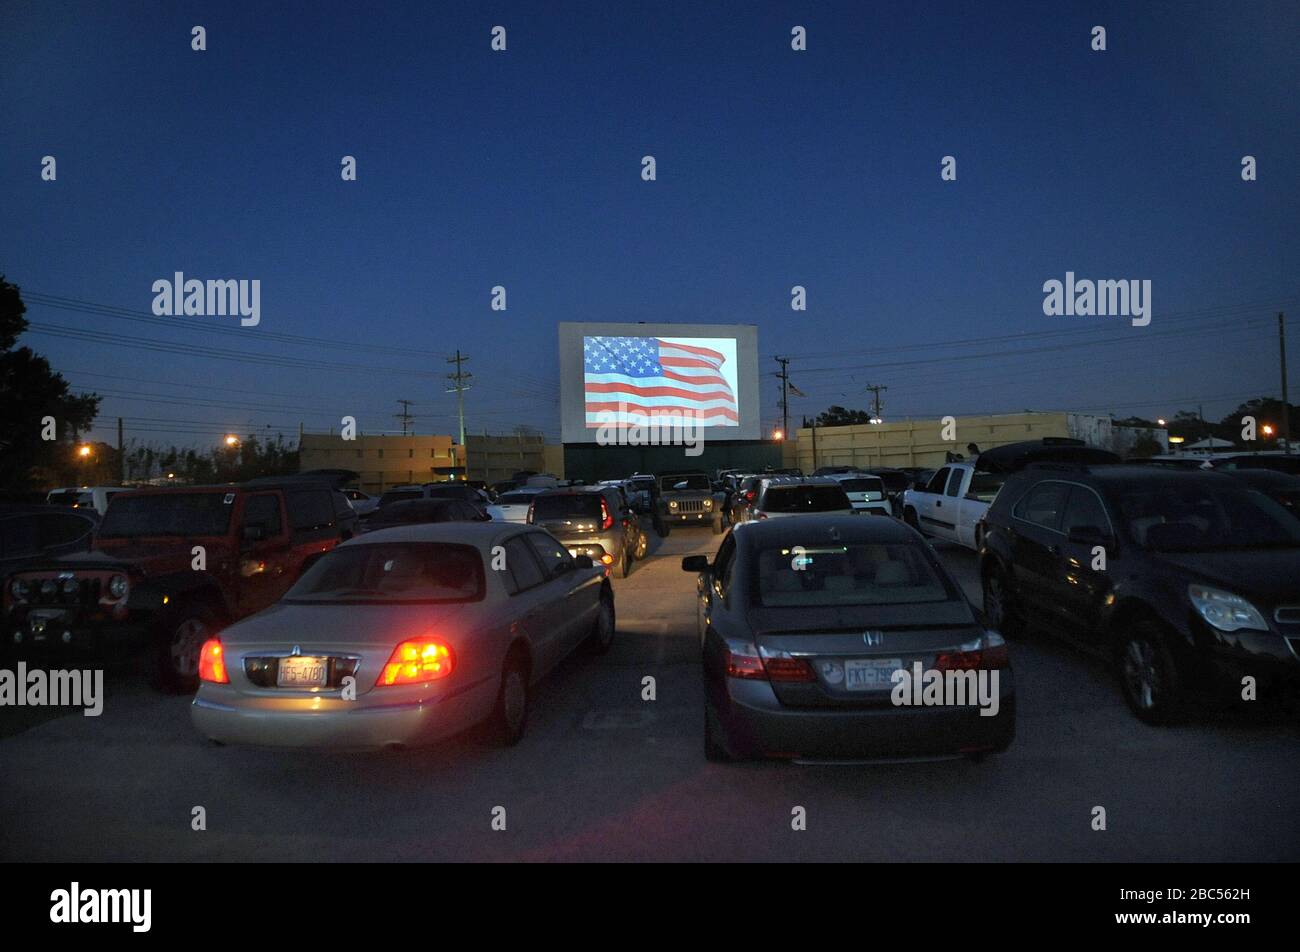 Lakeland, United States. 03rd Apr, 2020. April 2, 2020 - Lakeland, Florida, United States - The show begins at the Silver Moon drive-in theatre in Lakeland, Florida on April 2, 2020, the last night of operation before the state-wide stay-at-home order issued by Florida Governor Ron DeSantis to curb the spread of coronavirus takes effect. The two-screen Silver Moon, the last remaining drive-in of Polk County, Florida, has seen an increase in business since the COVID-19 pandemic forced the closure of indoor theaters. Credit: Paul Hennessy/Alamy Live News Stock Photo